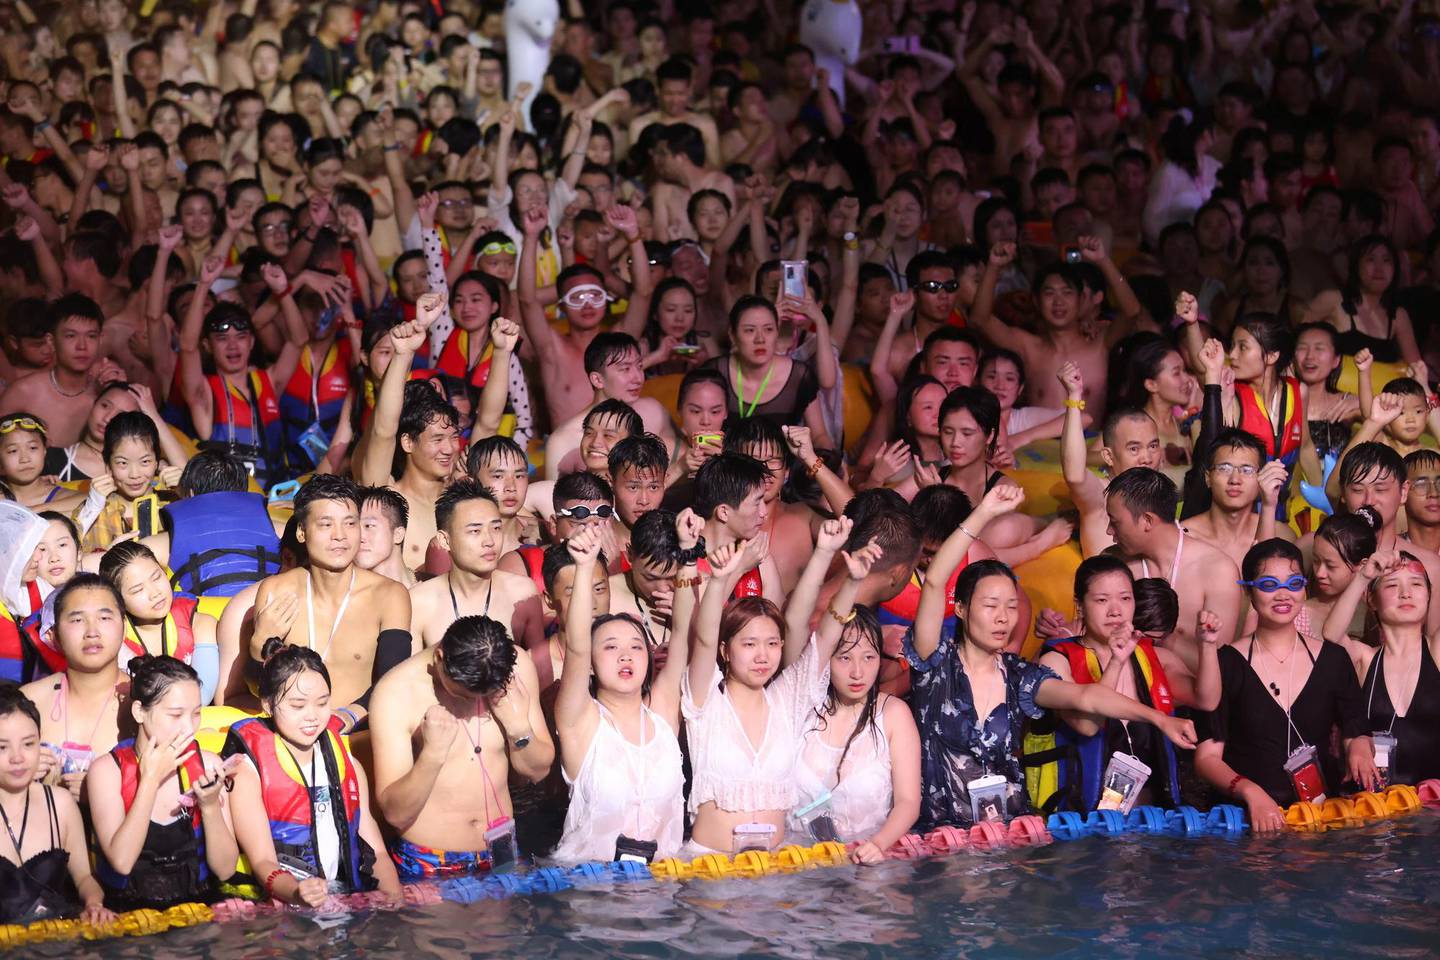 People enjoy a music party inside a swimming pool at the Wuhan Maya Beach Park, in Wuhan, following the coronavirus disease (COVID-19) outbreak, Hubei province, China August 15, 2020. Picture taken August 15, 2020. REUTERS/Stringer ATTENTION EDITORS - THIS IMAGE WAS PROVIDED BY A THIRD PARTY. CHINA OUT.